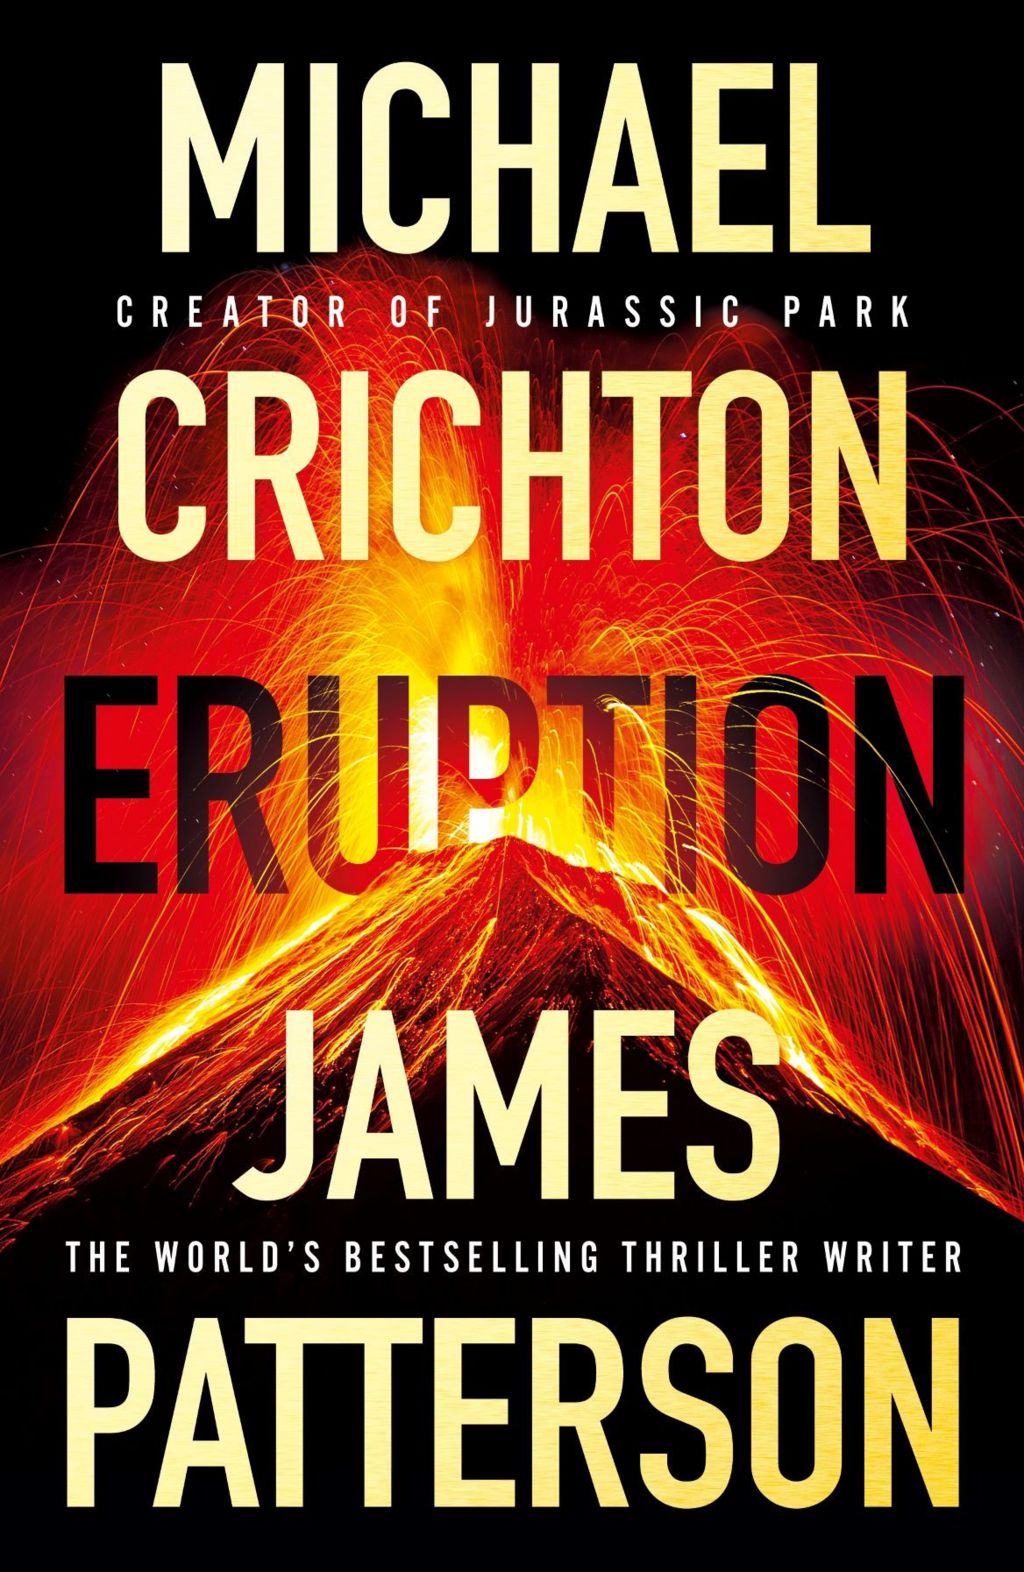 Front cover of Eruption by Michael Crichton and James Patterson